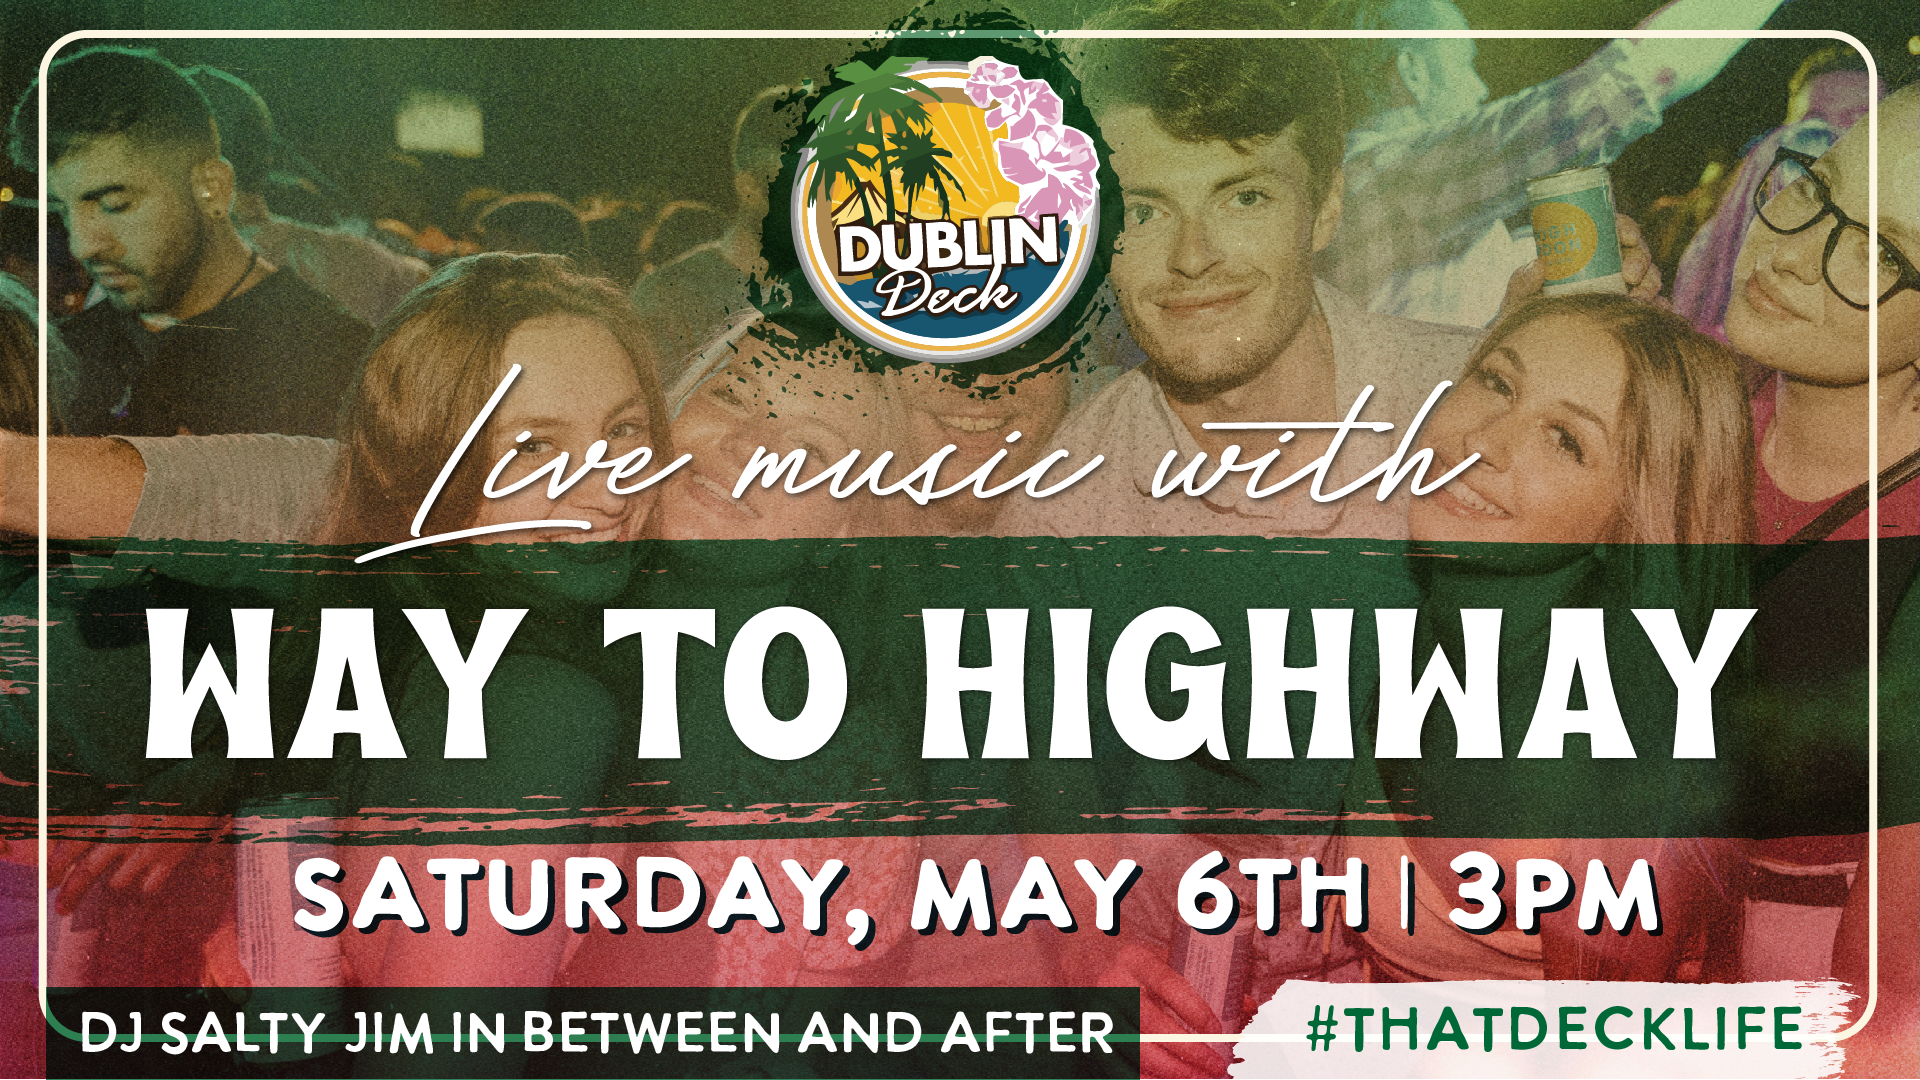 Hang out at Dublin Deck and enjoy the sounds of Way To Highway! Music begins at 3PM